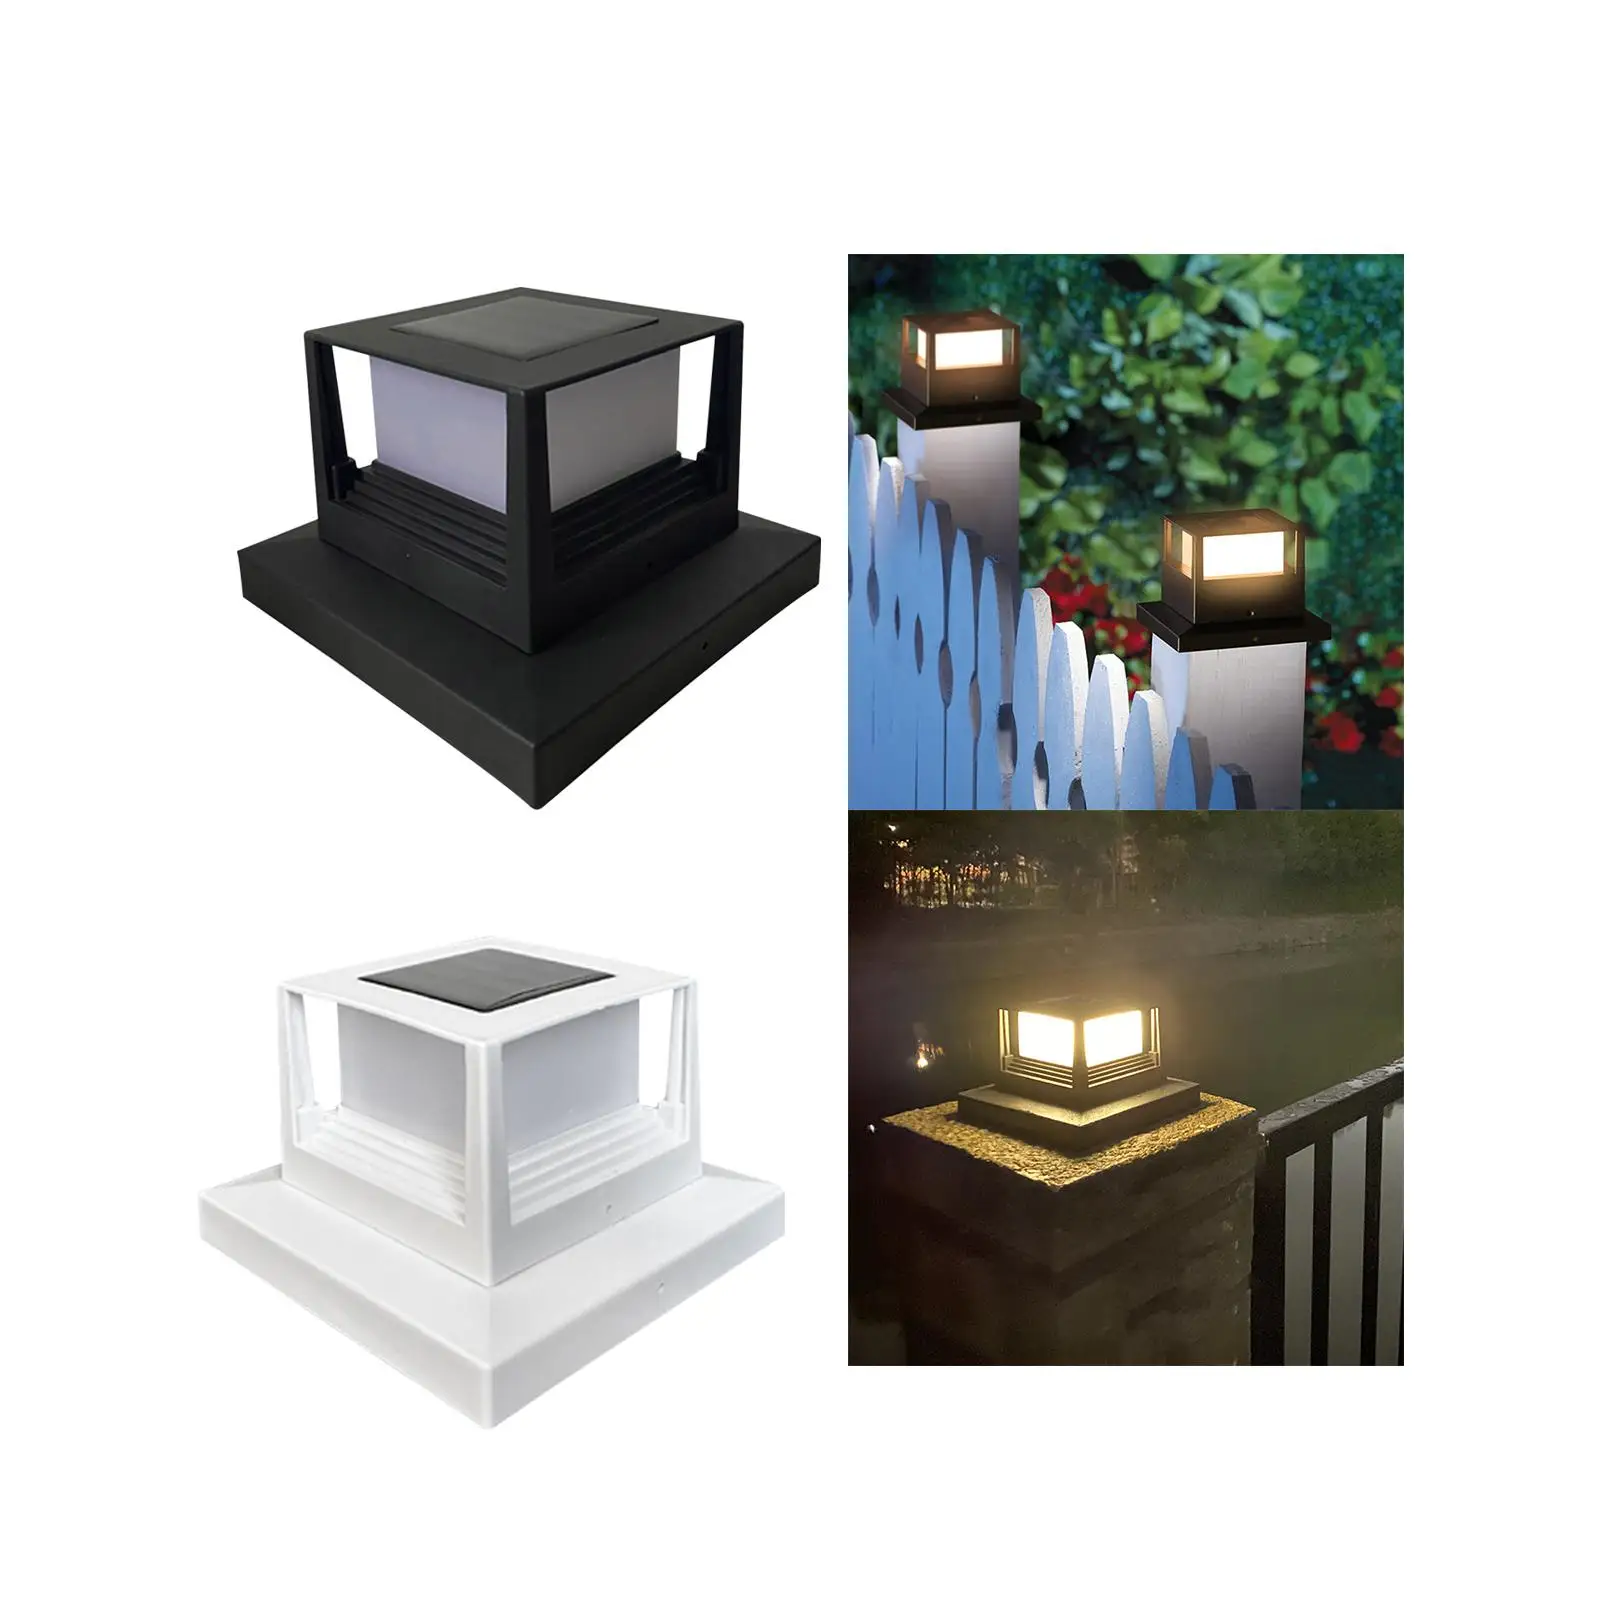 Solar Post Light Outdoor Warm White LED Lighting IP44 Waterproof Outside Light for Garden Patio Decor Deck Courtyard Pathway